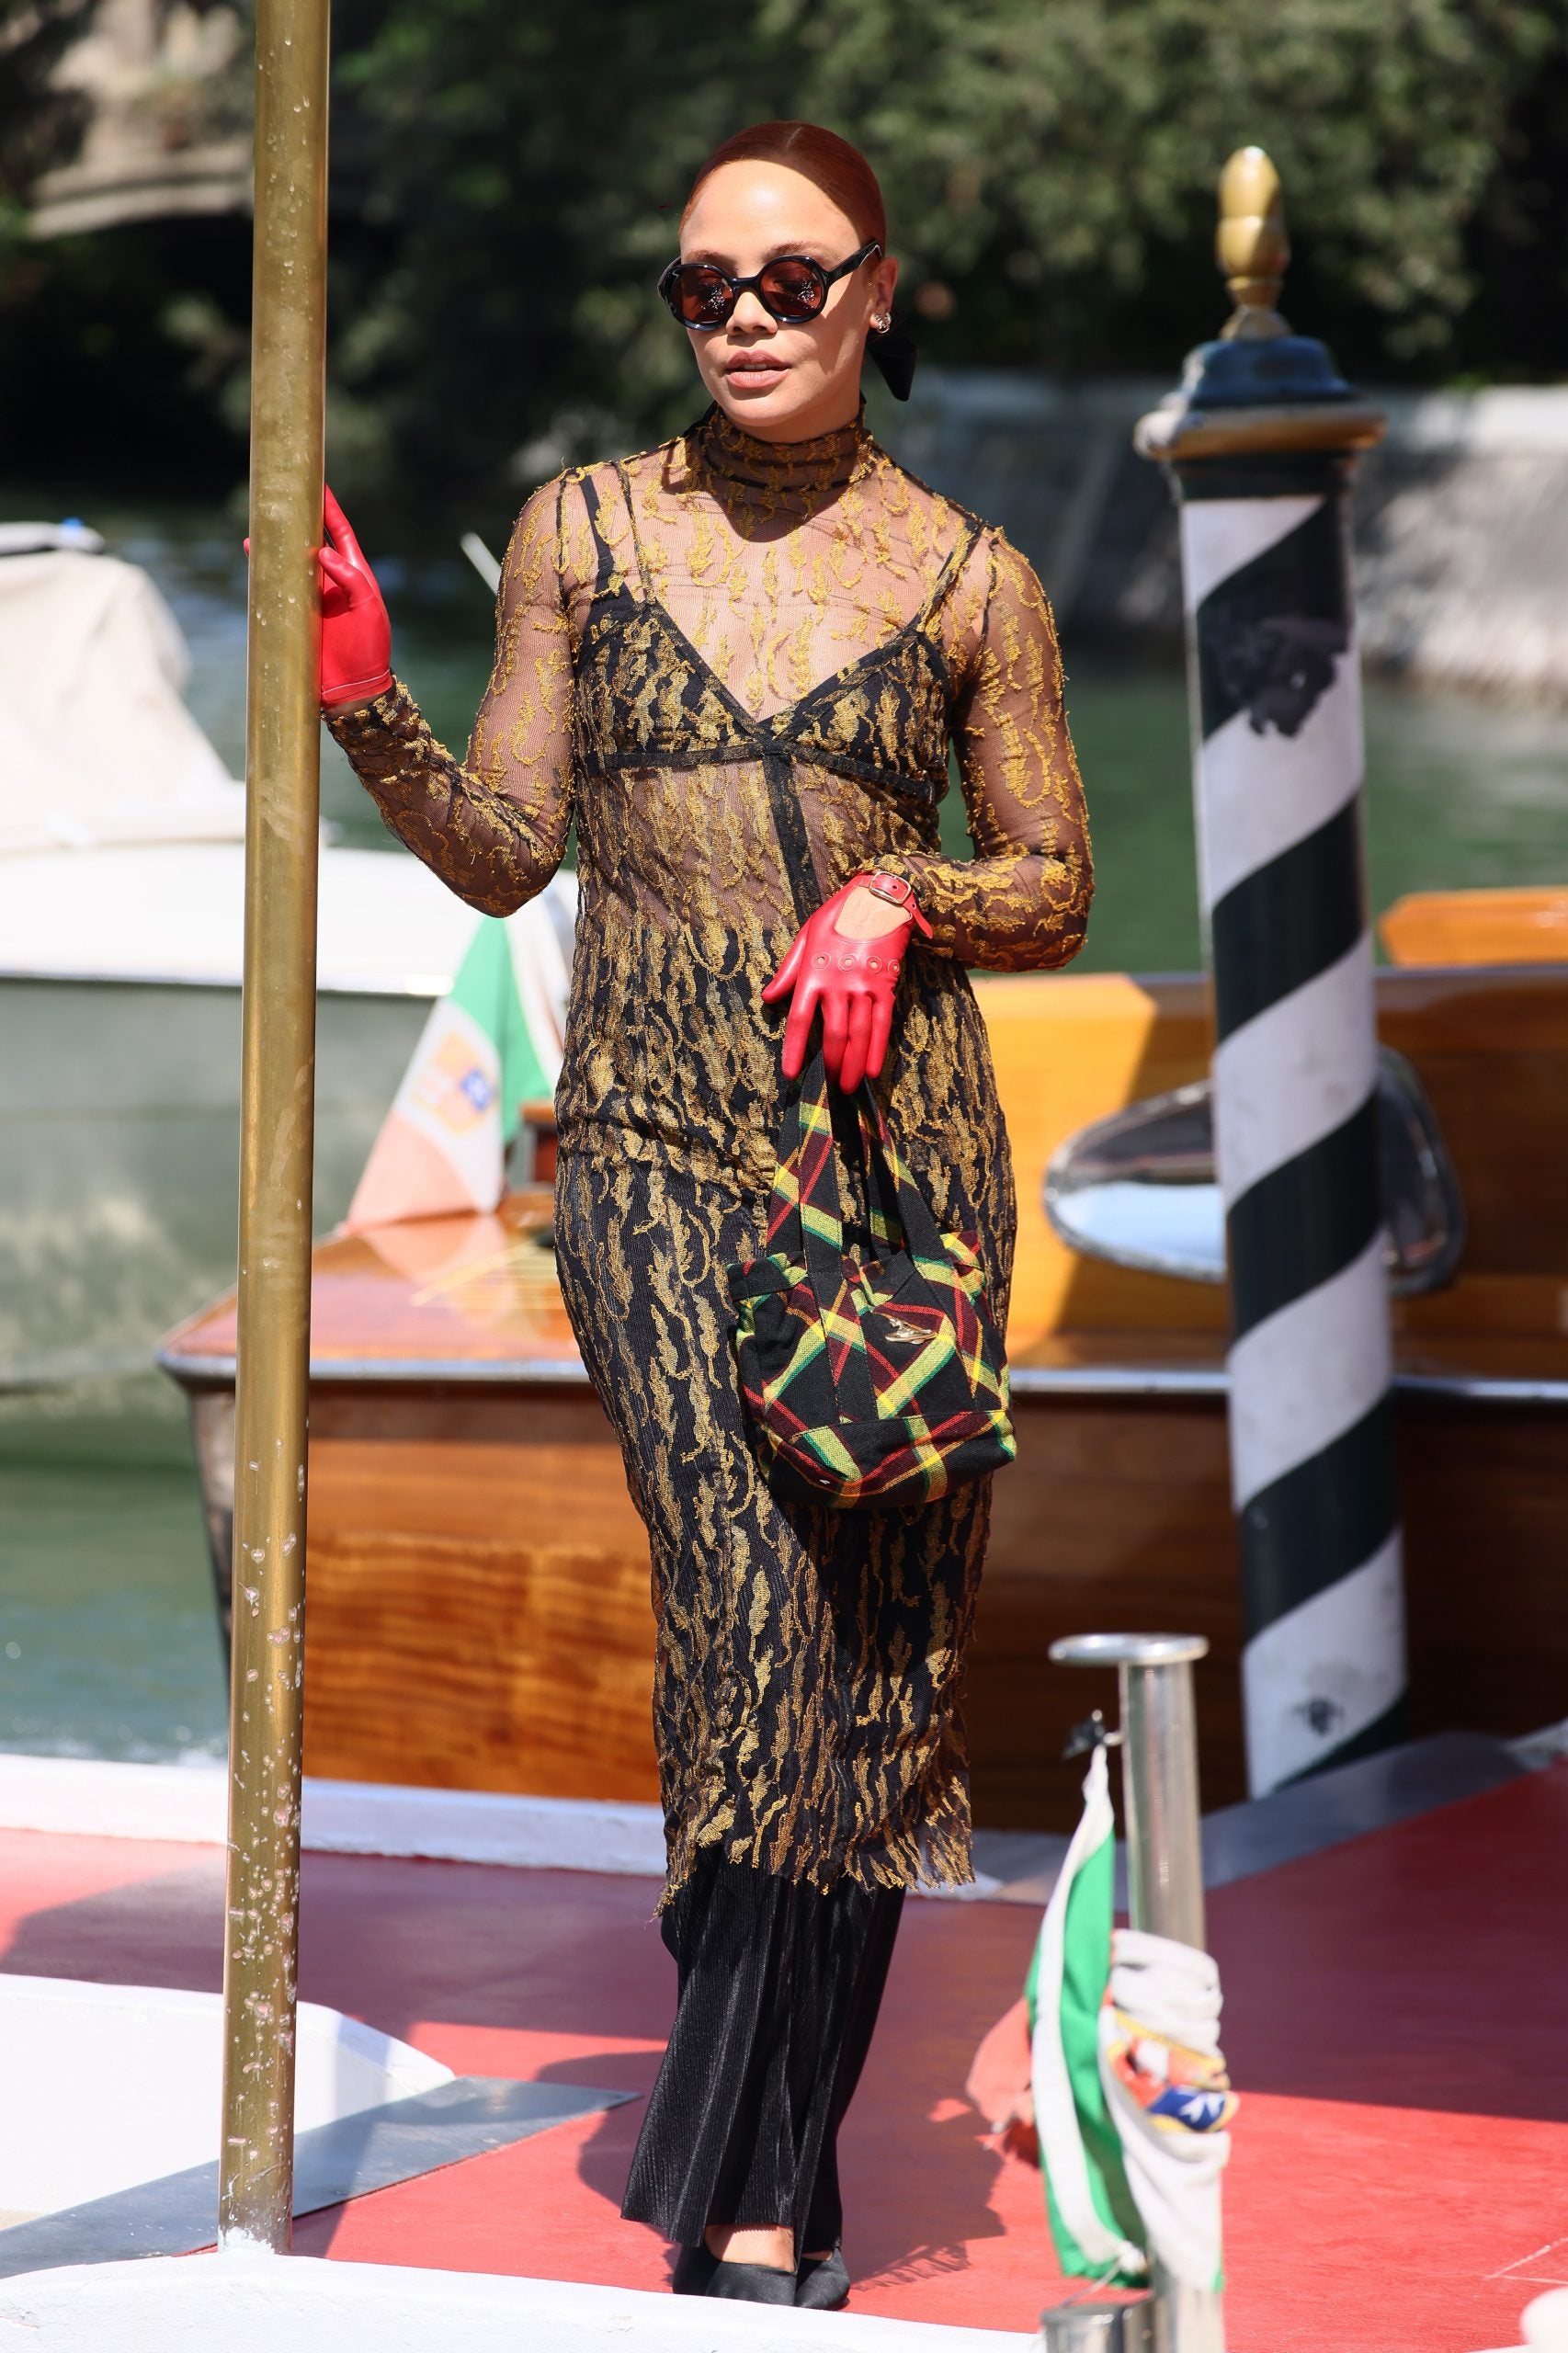 Here Are The Venice Film Festival Looks That We’re Loving